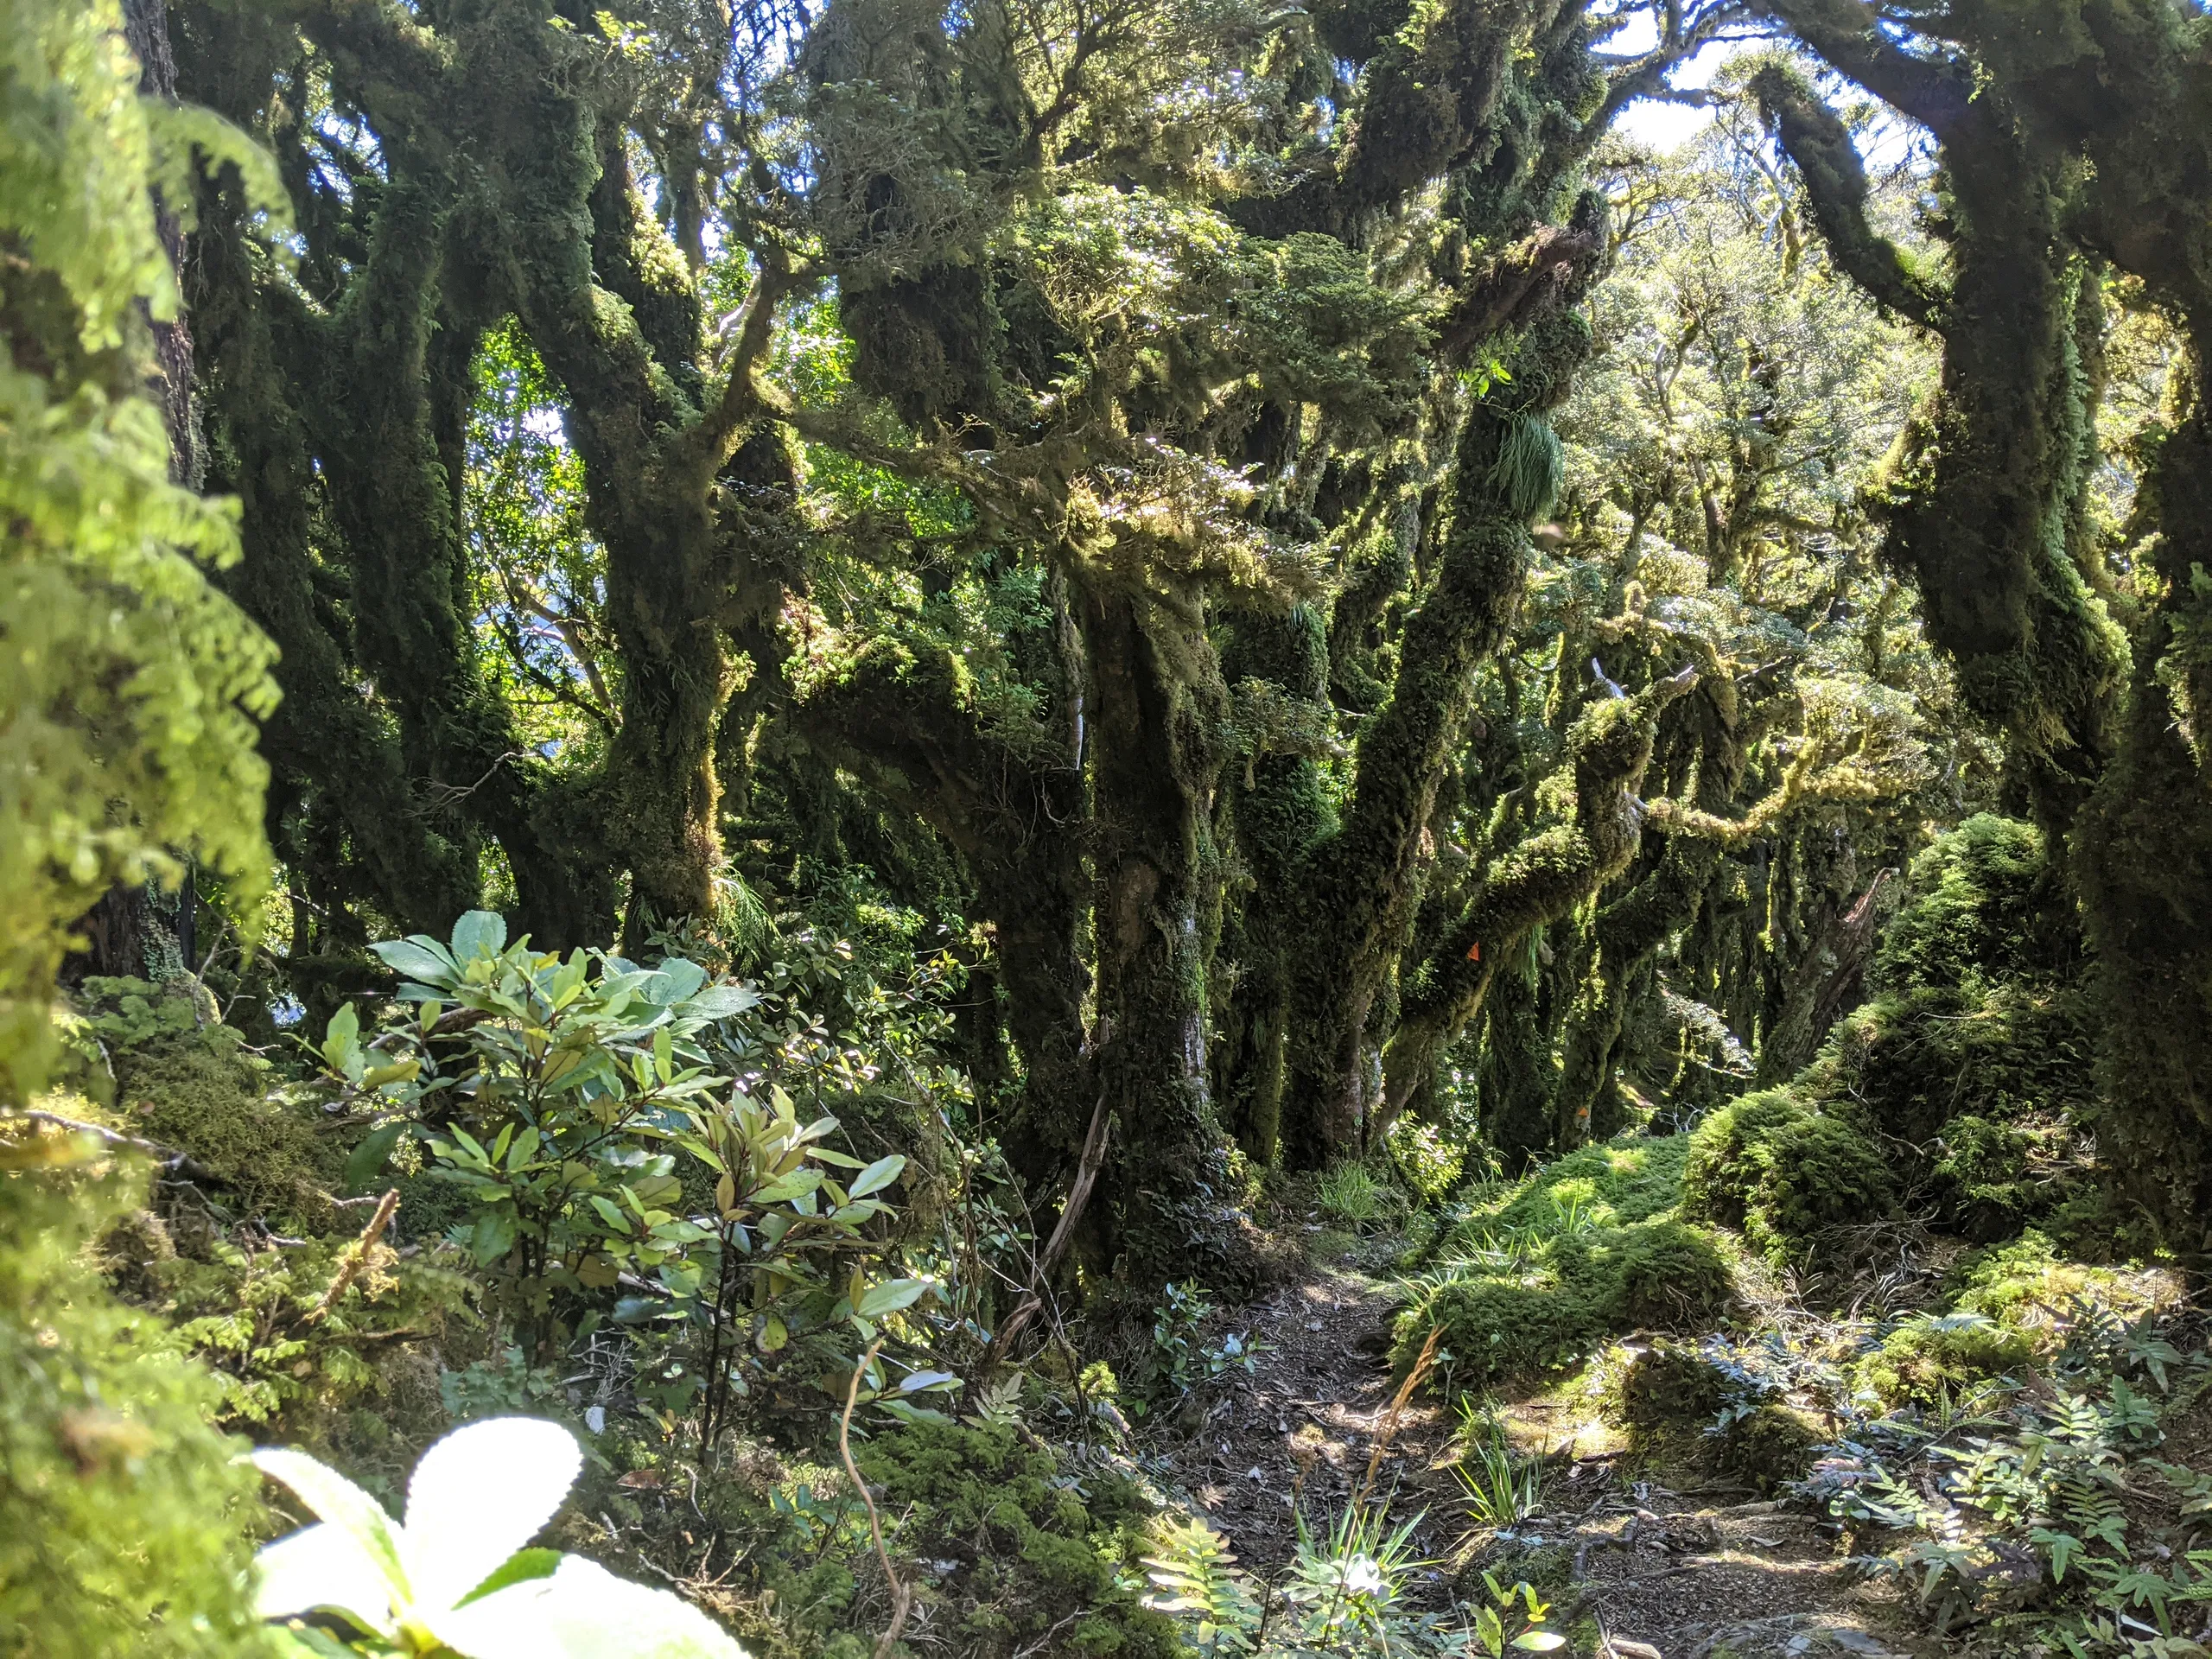 The last 500-600m of the track is lined with these beautiful, mossy, twisted trees. It's intensely green and my favourite section of the trail.